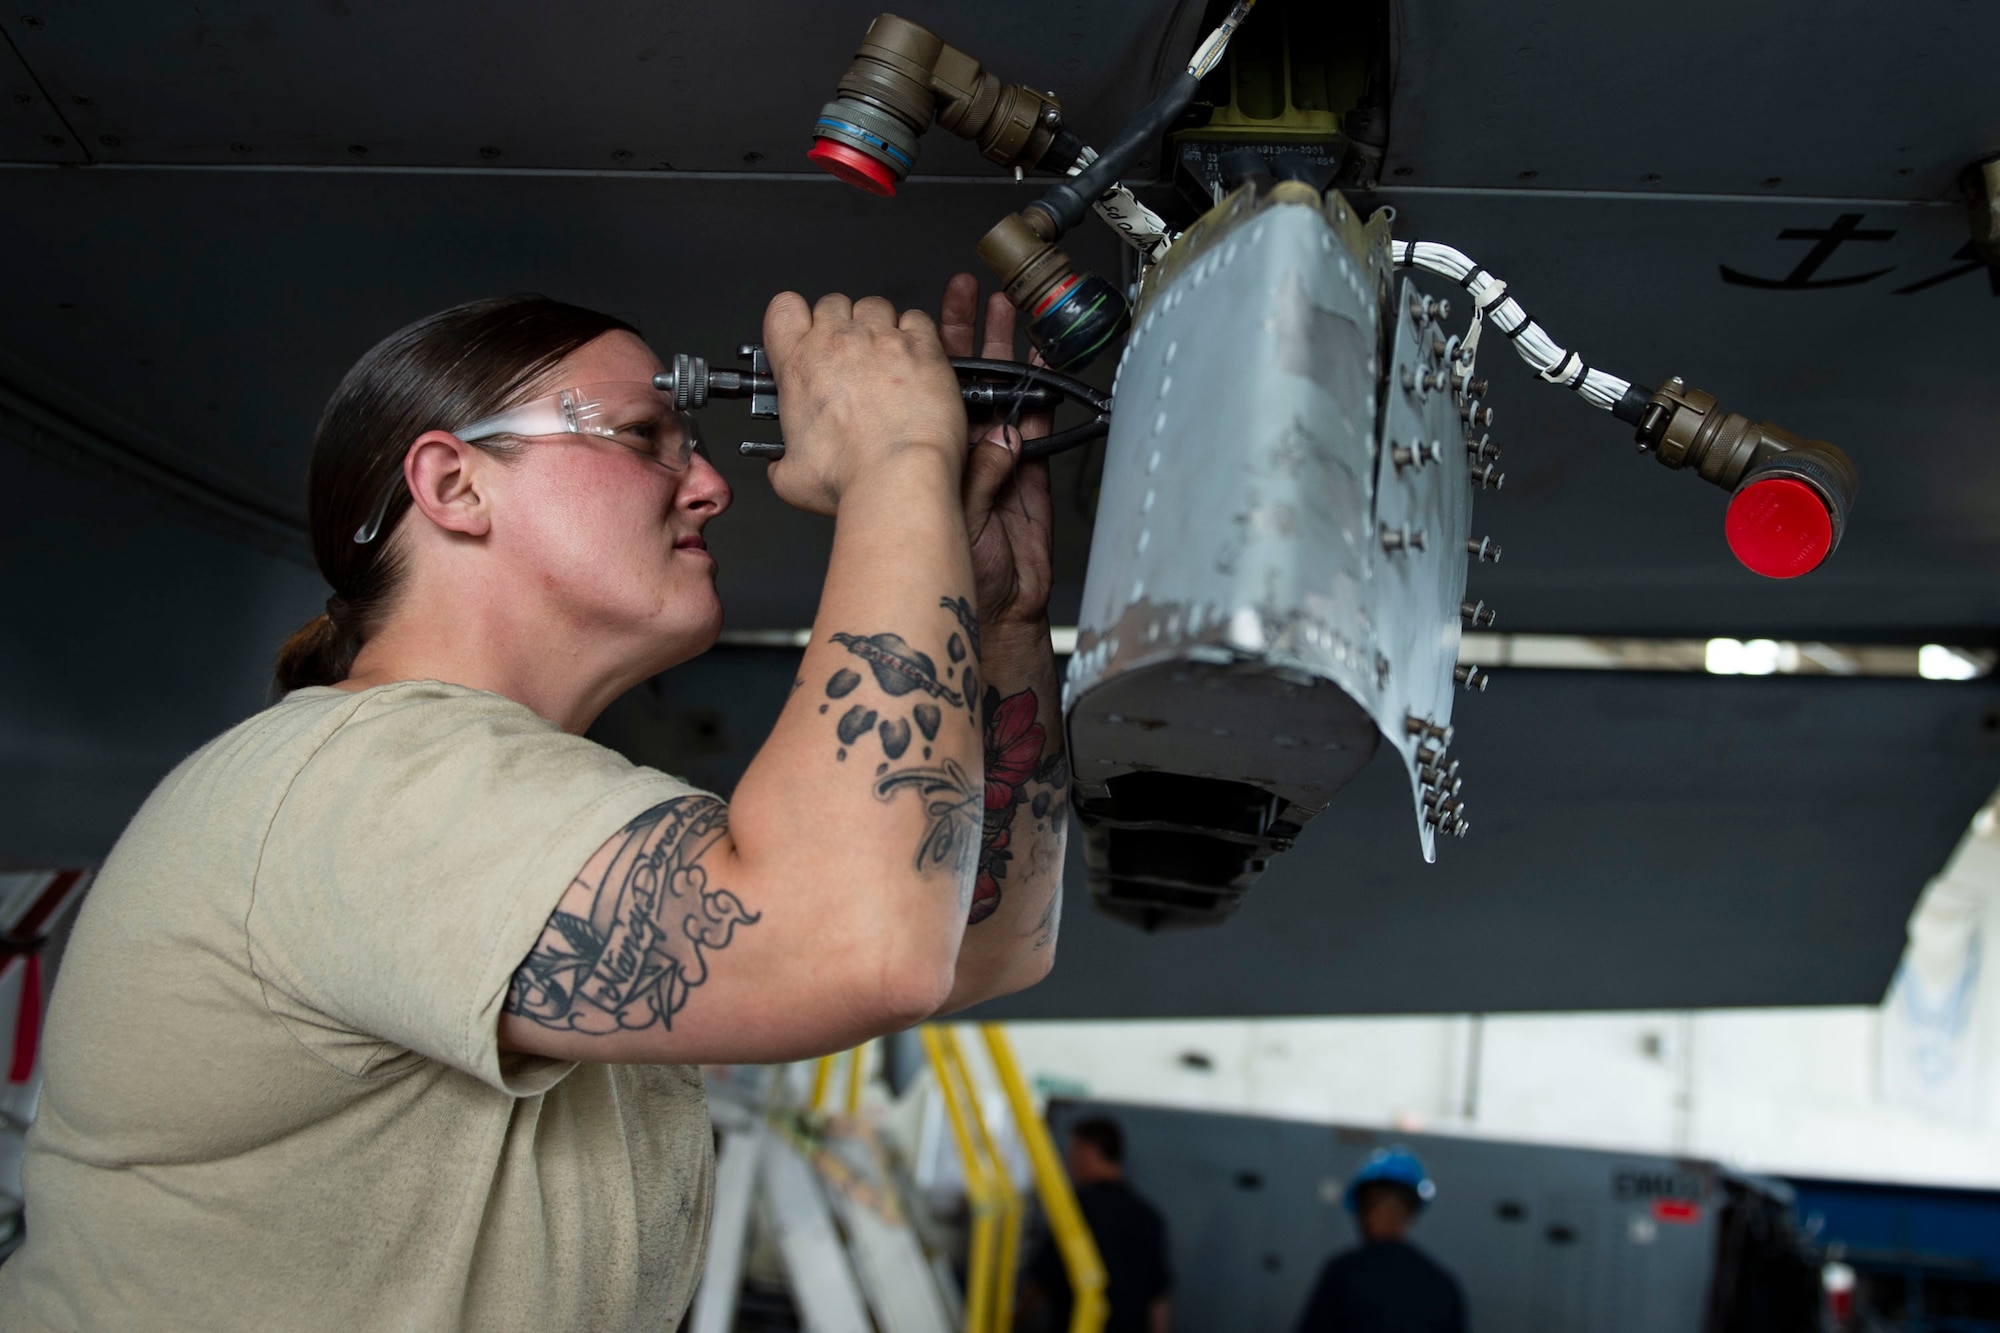 Staff Sgt. Nancy Warner, 23d Aircraft Maintenance Squadron (AMXS) weapons load crew chief, removes a screw during an A-10C Thunderbolt II phase inspection Oct. 8, 2019, at Moody Air Force Base, Ga. During a phase inspection, the 23d Maintenance Squadron Airmen depanel the aircraft to reach the internal workings and perform in depth examinations on A-10s after every 500 flight hours. These maintainers work day and night to ensure the aircraft are safe and reliable combat assets. (U.S. Air Force photo by Airman Azaria E. Foster)